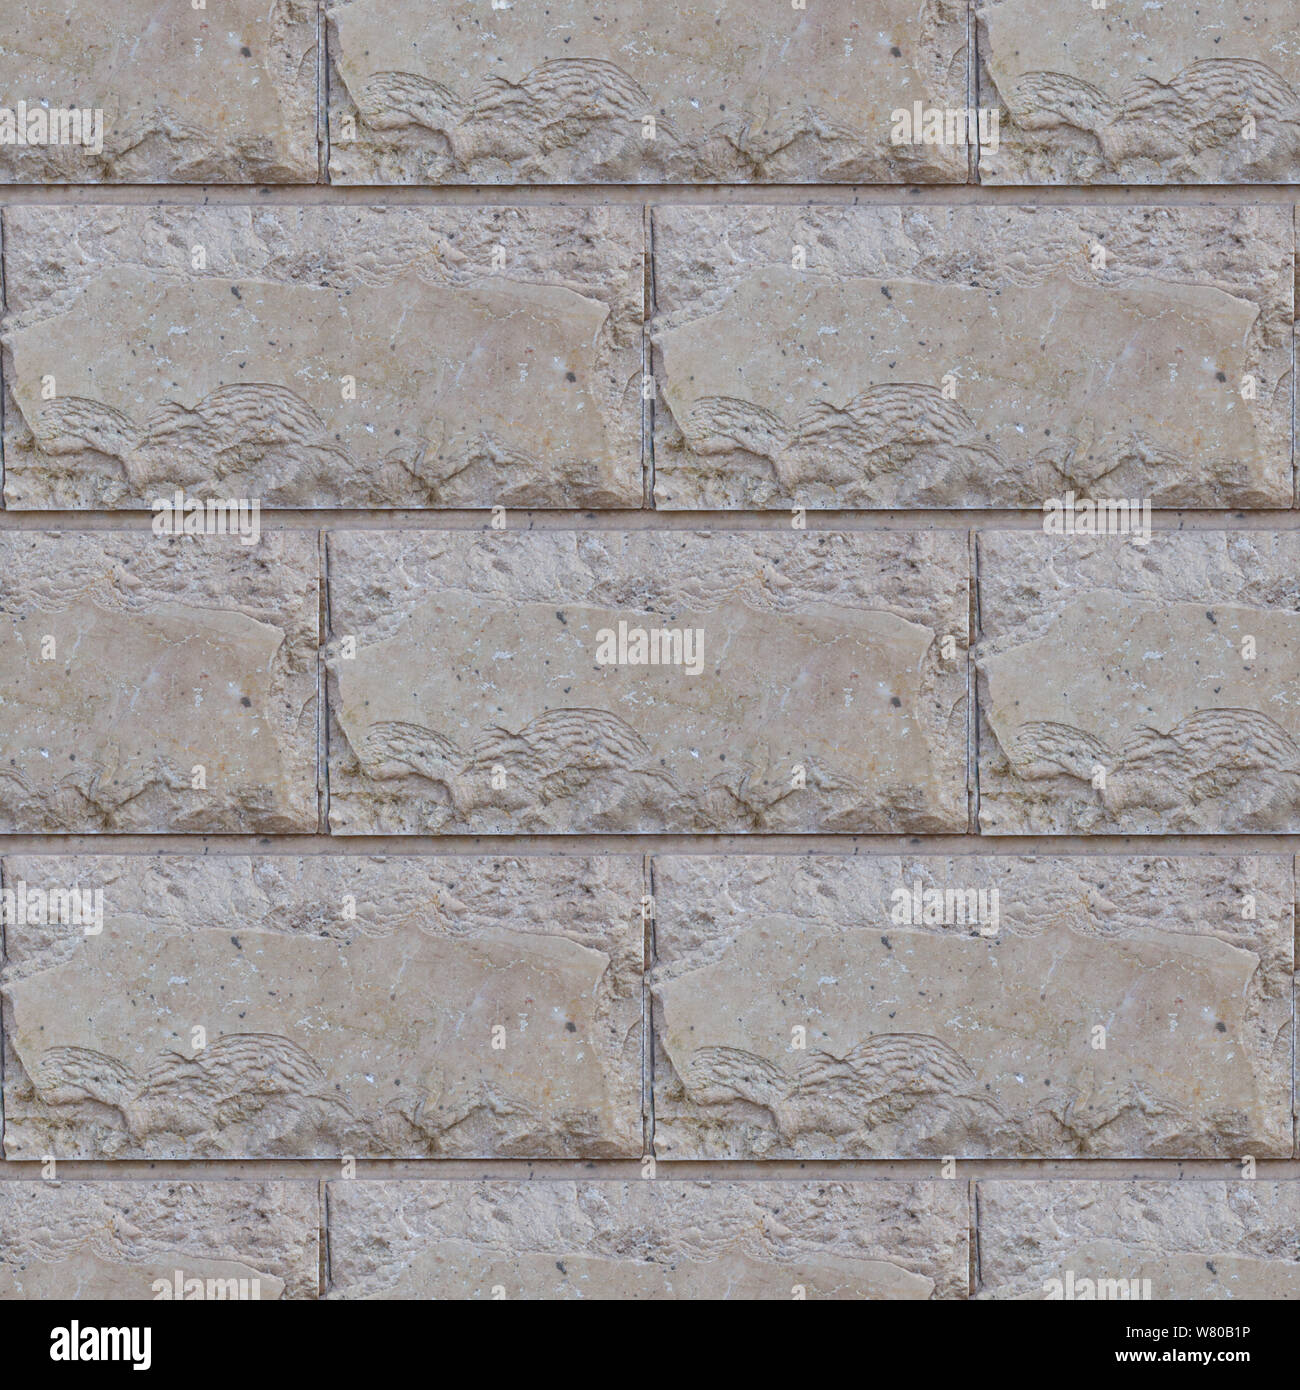 Abstract seamless photo pattern for designers or developers. Old natural stone masonry with fragments natural rhombus. Stock Photo